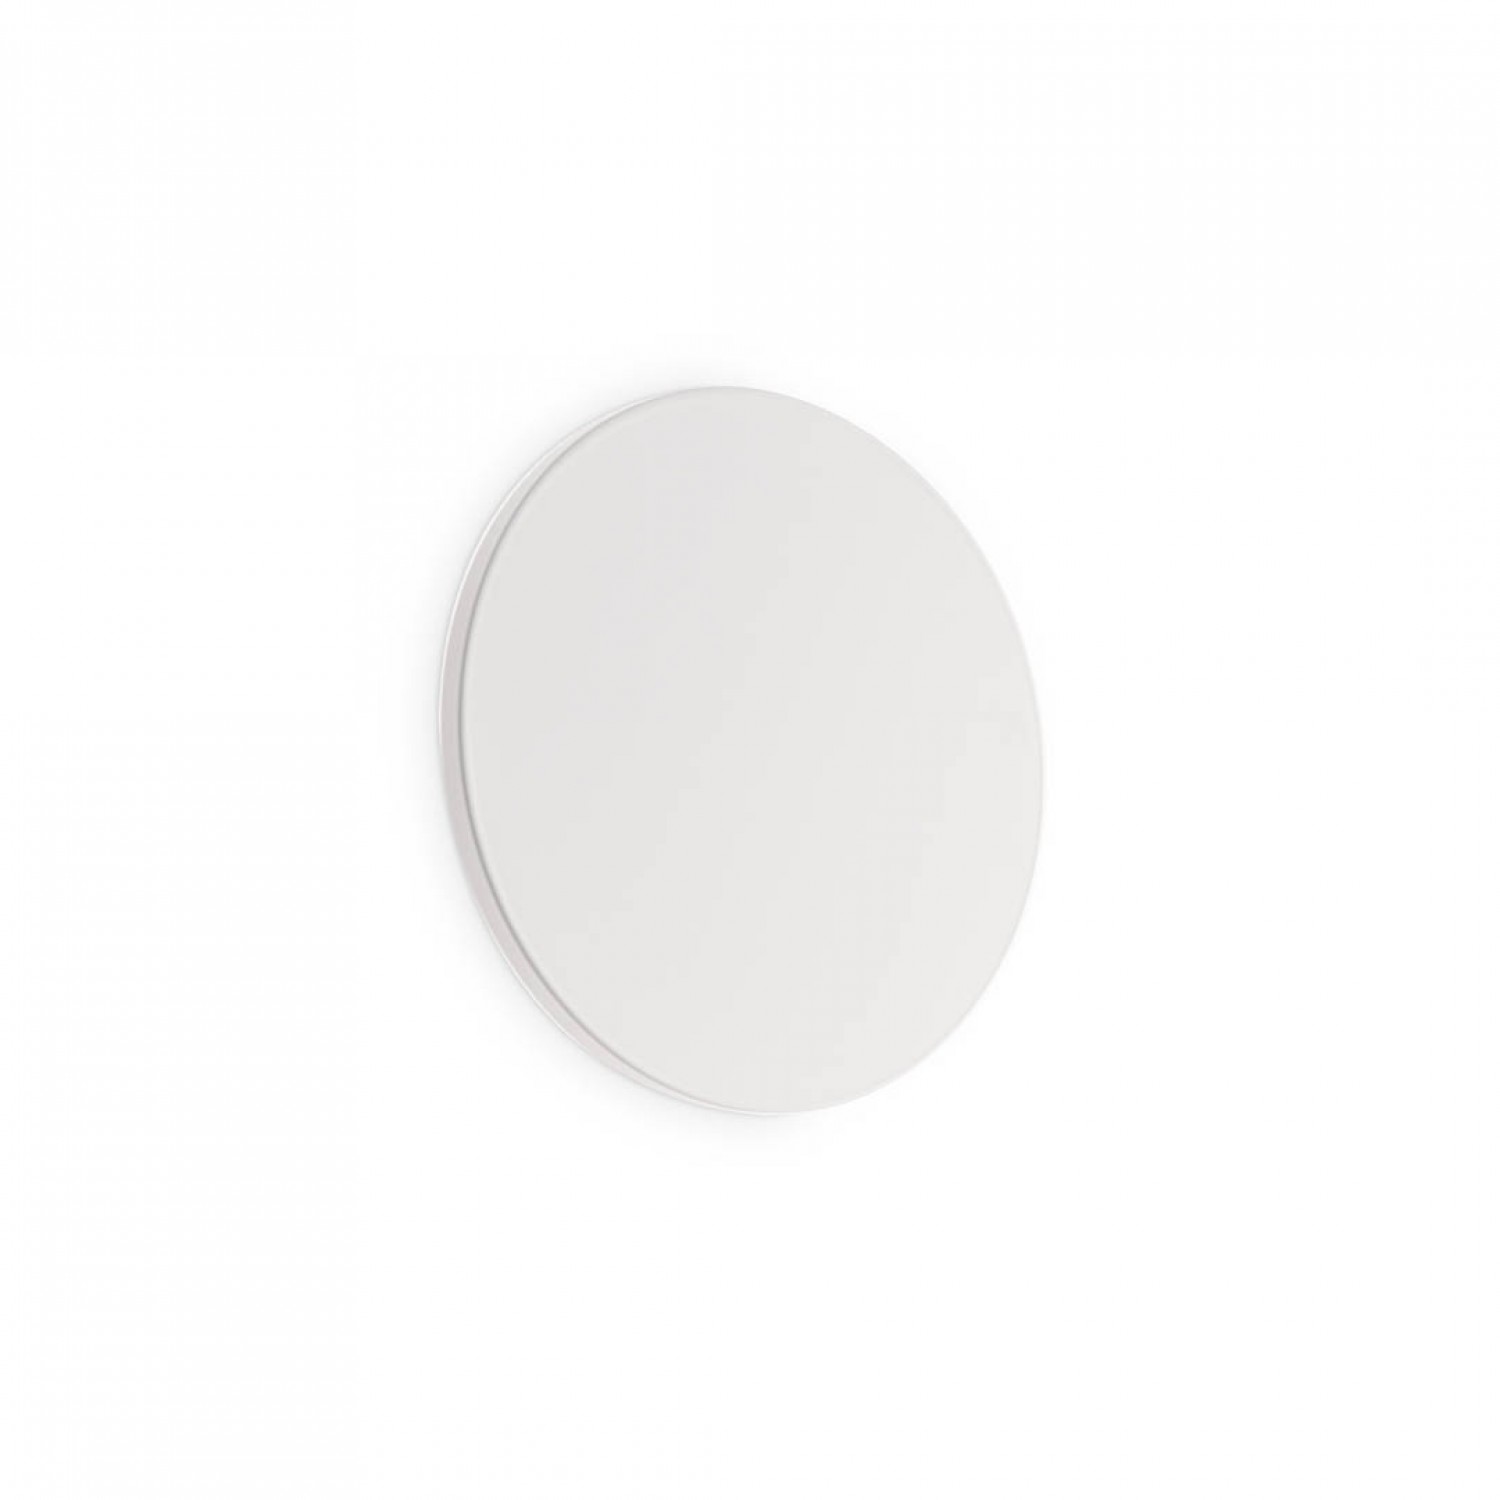 alt_image Бра Ideal Lux COVER AP D15 ROUND BIANCO 195704